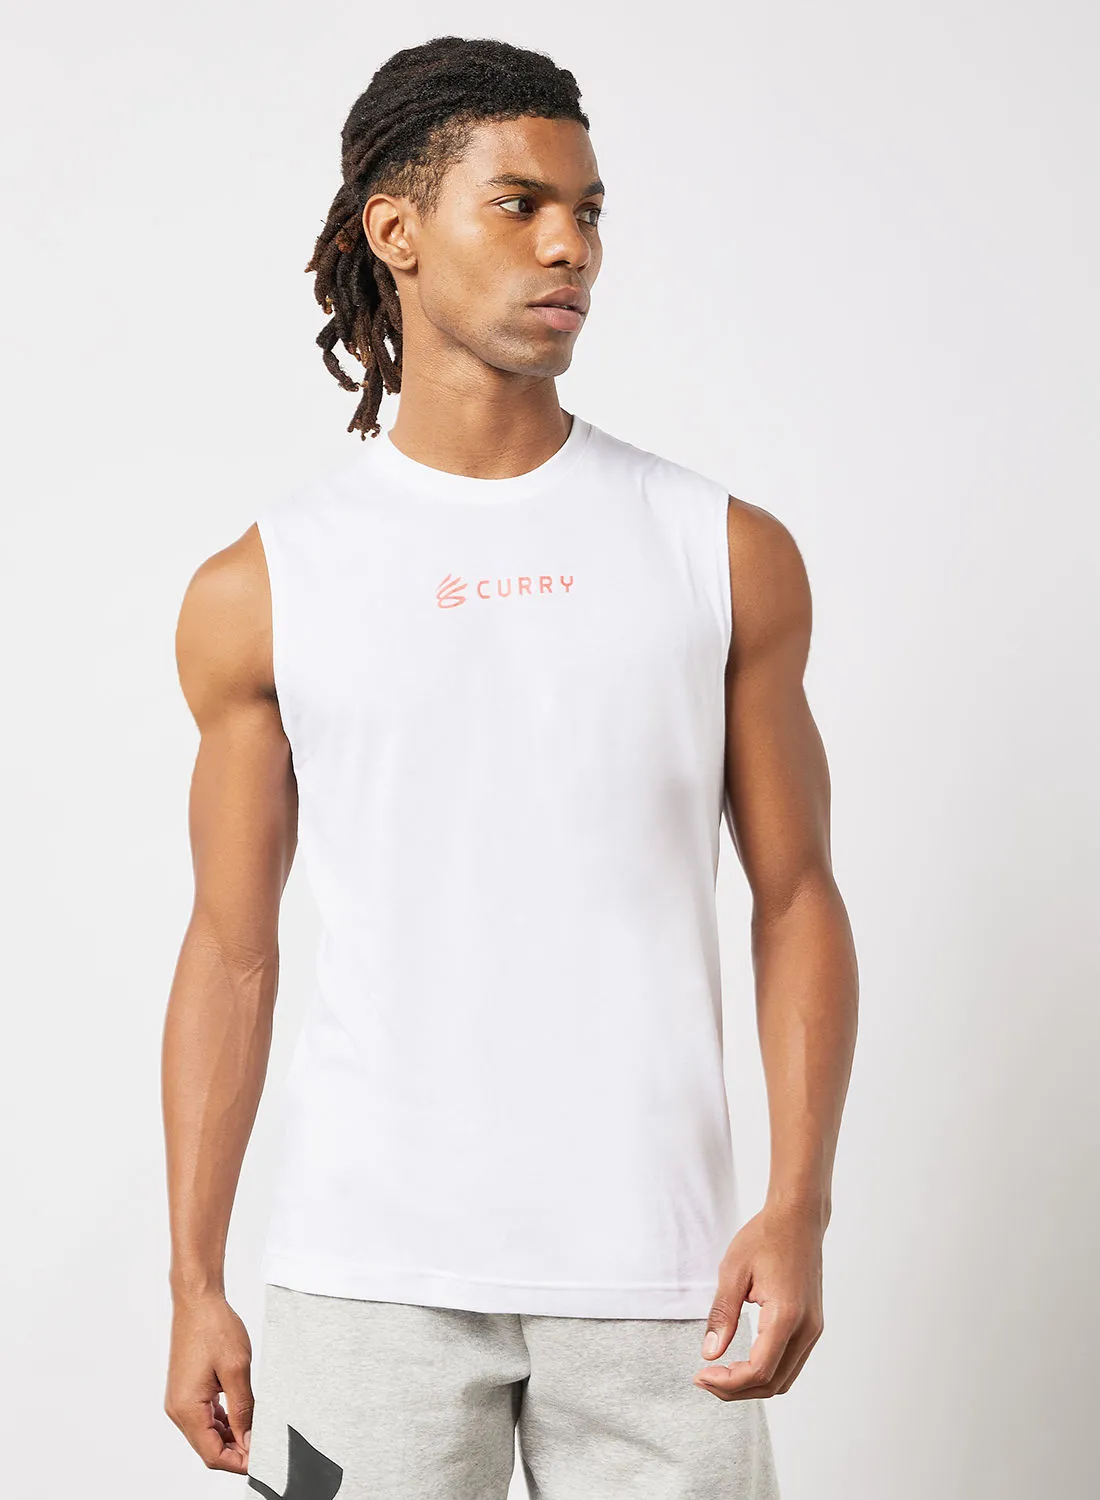 UNDER ARMOUR Curry Graphic Basketball Tank Top